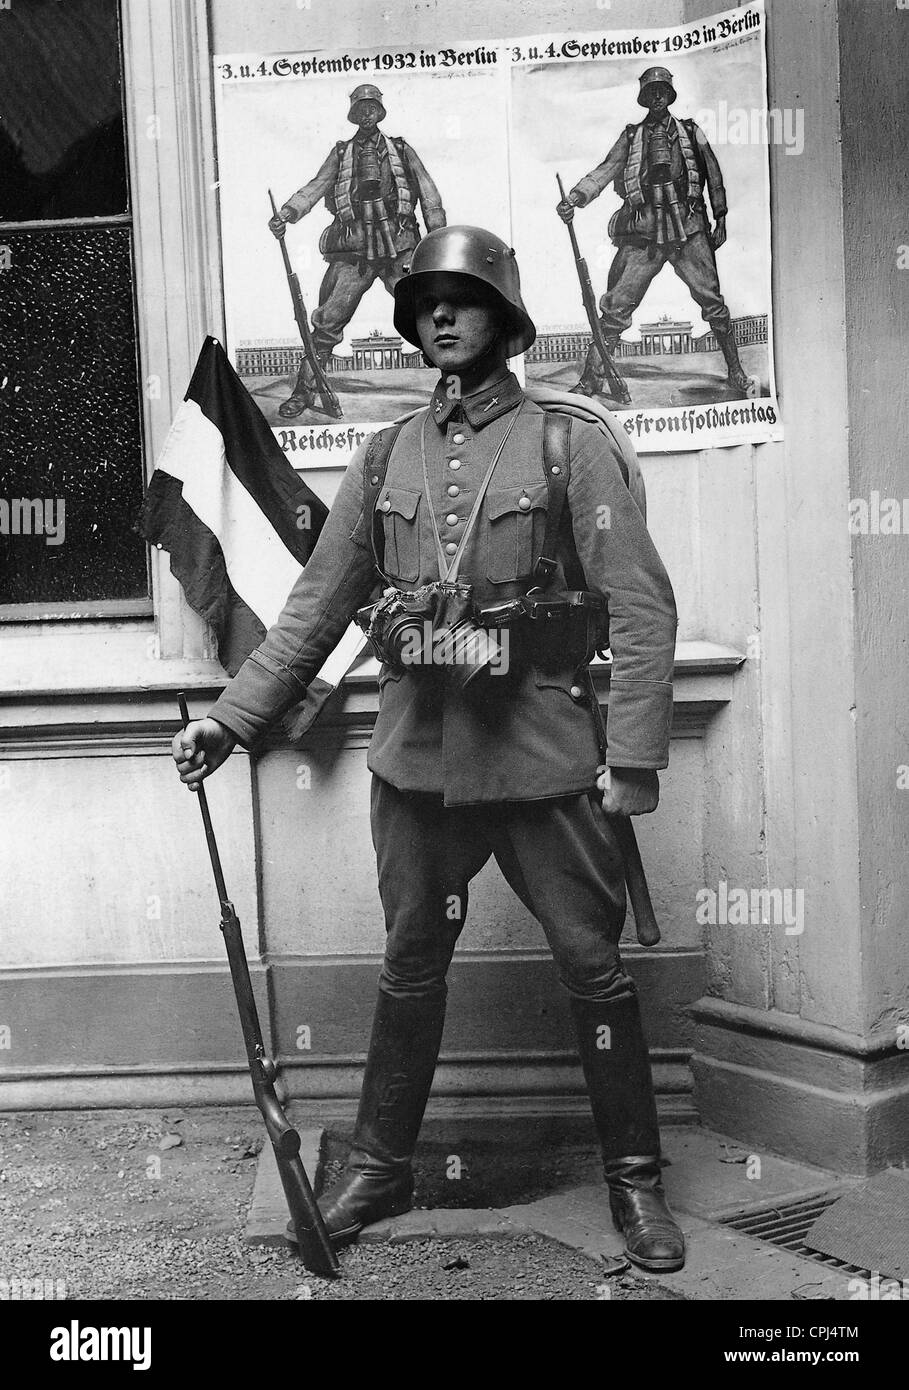 The 13th Reichsfrontsoldatentag, 1932 Stock Photo